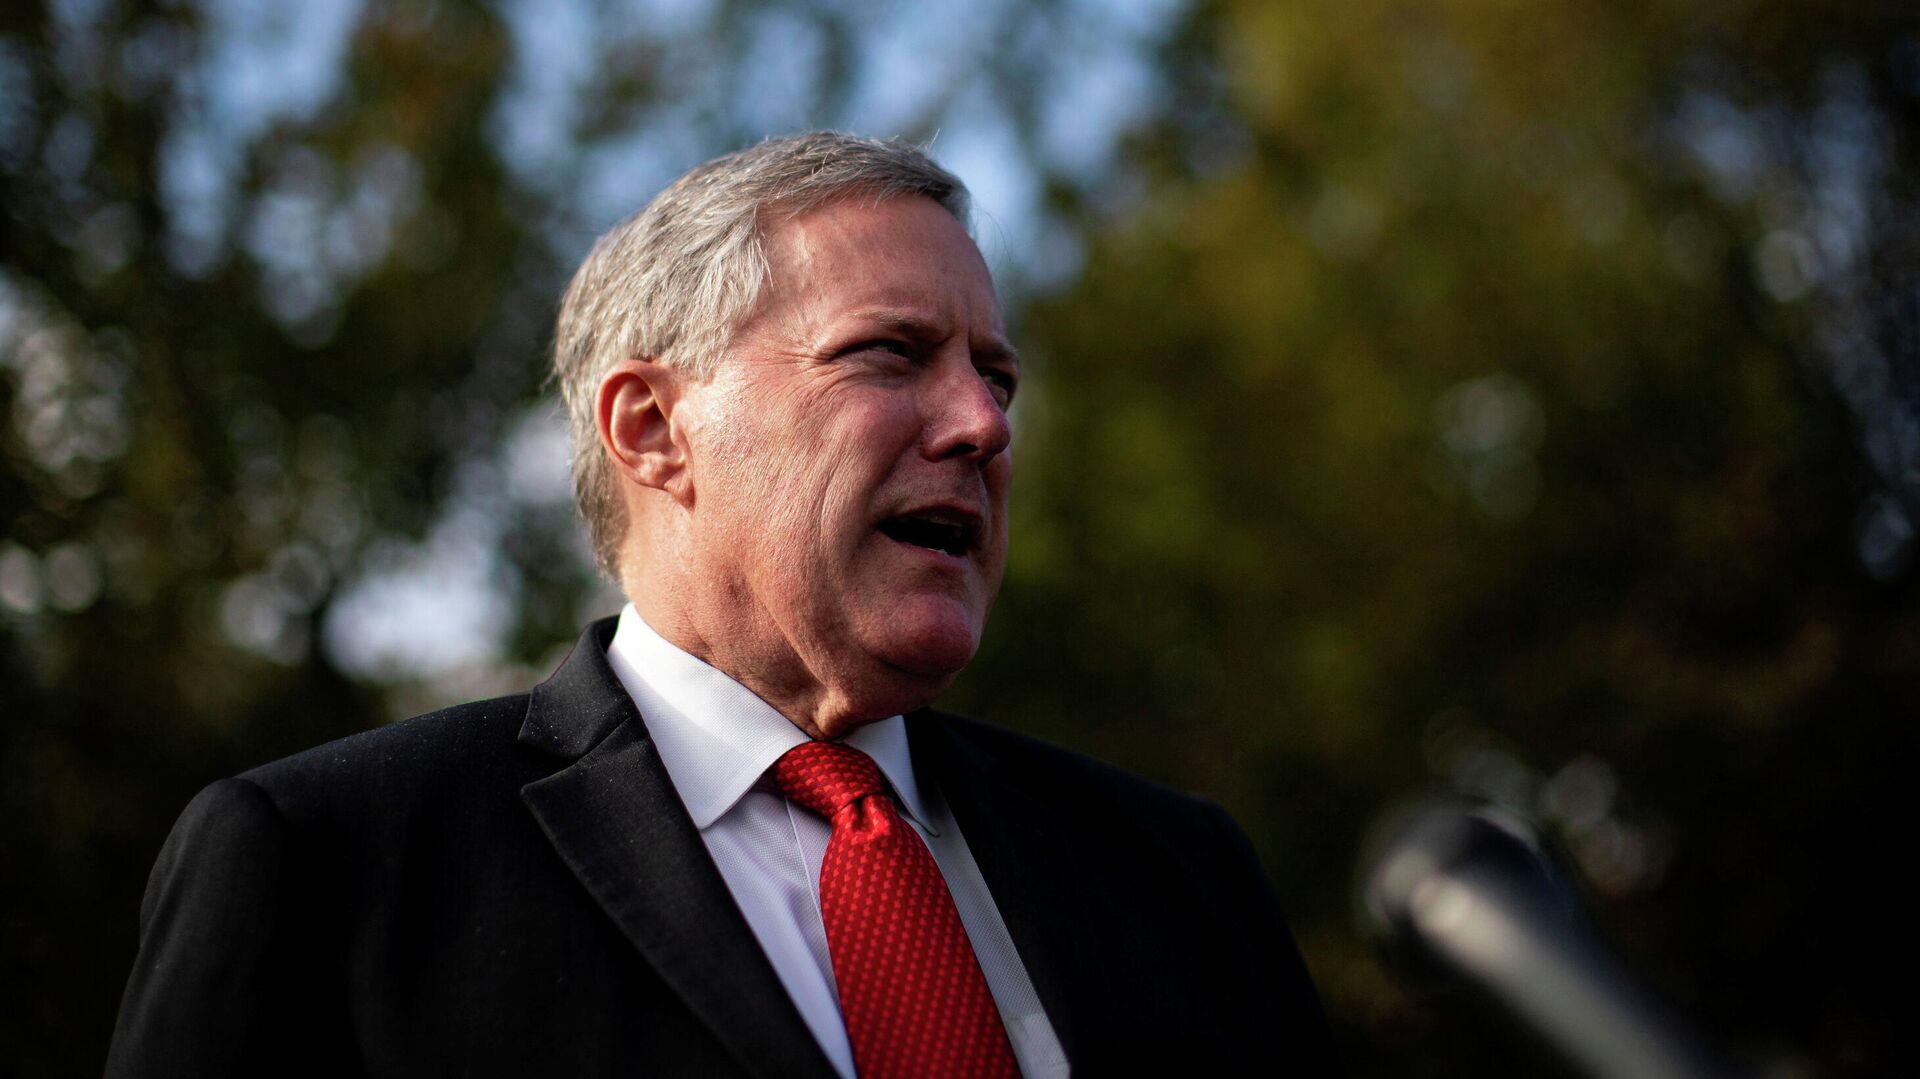 White House Chief of Staff Mark Meadows speaks to reporters following a television interview, outside the White House in Washington, U.S. October 21, 2020 - Sputnik International, 1920, 07.12.2021